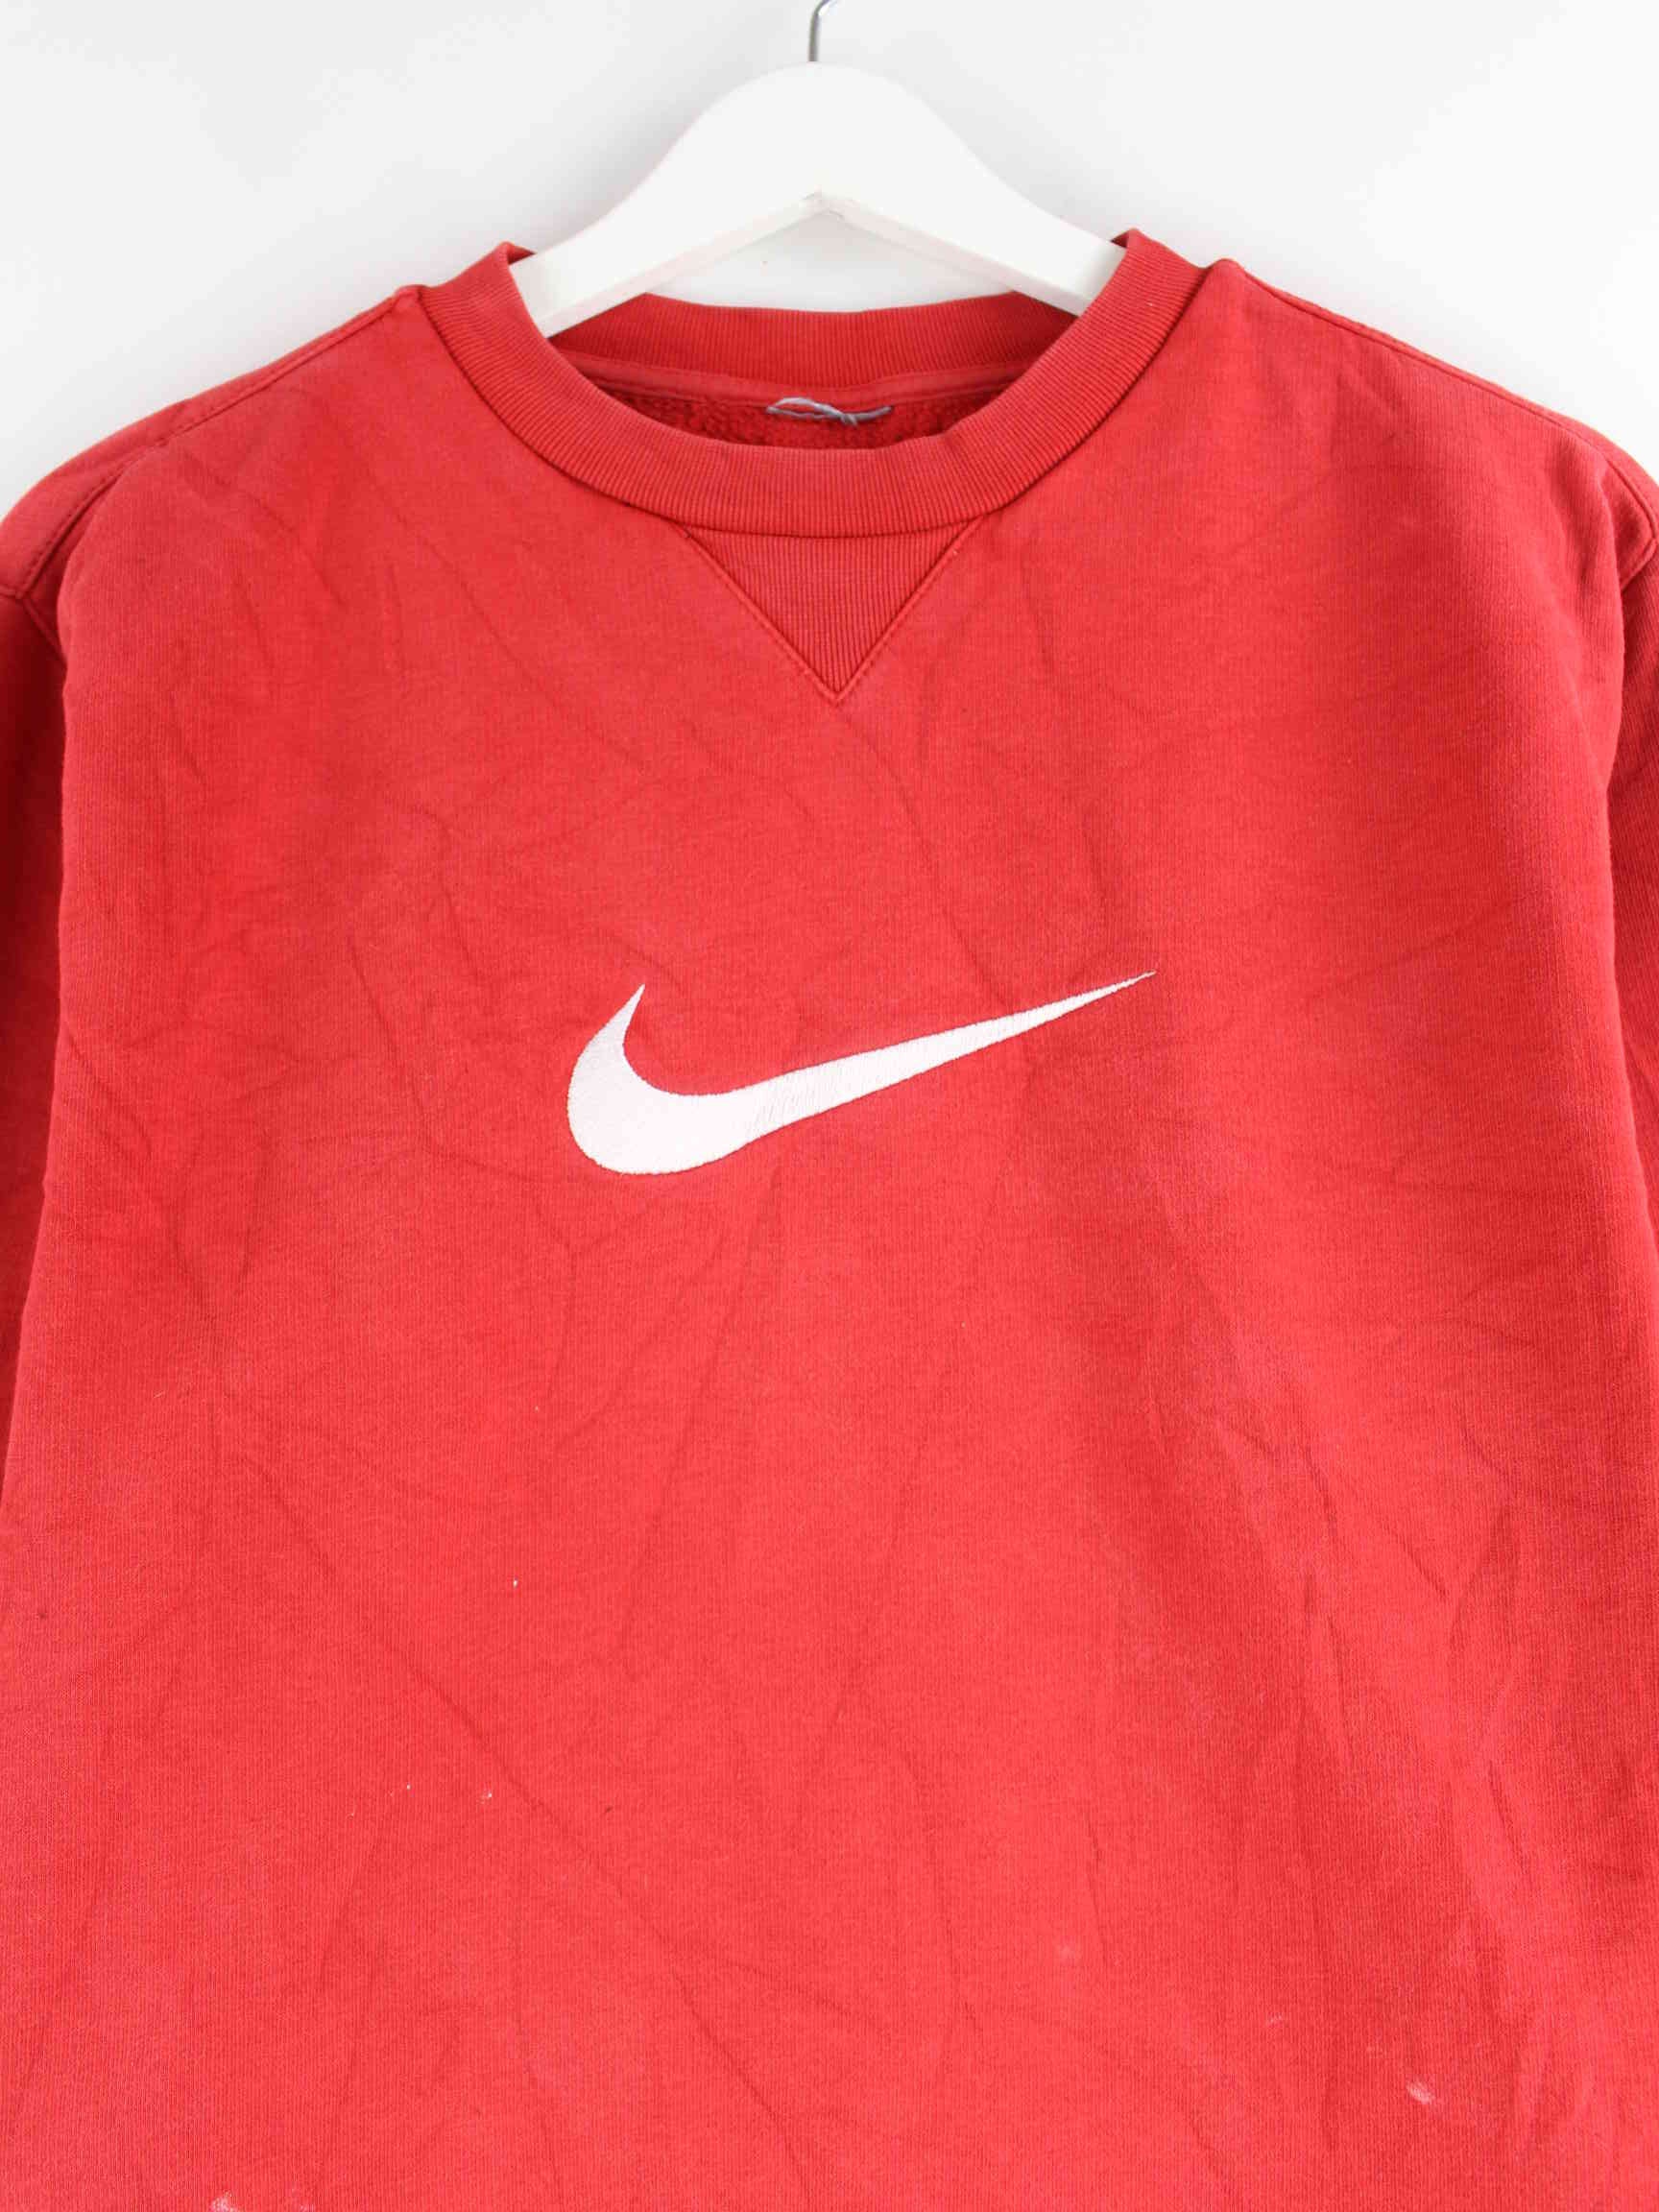 Nike 90s Vintage Big Swoosh Embroidered Sweater Rot S (detail image 1)